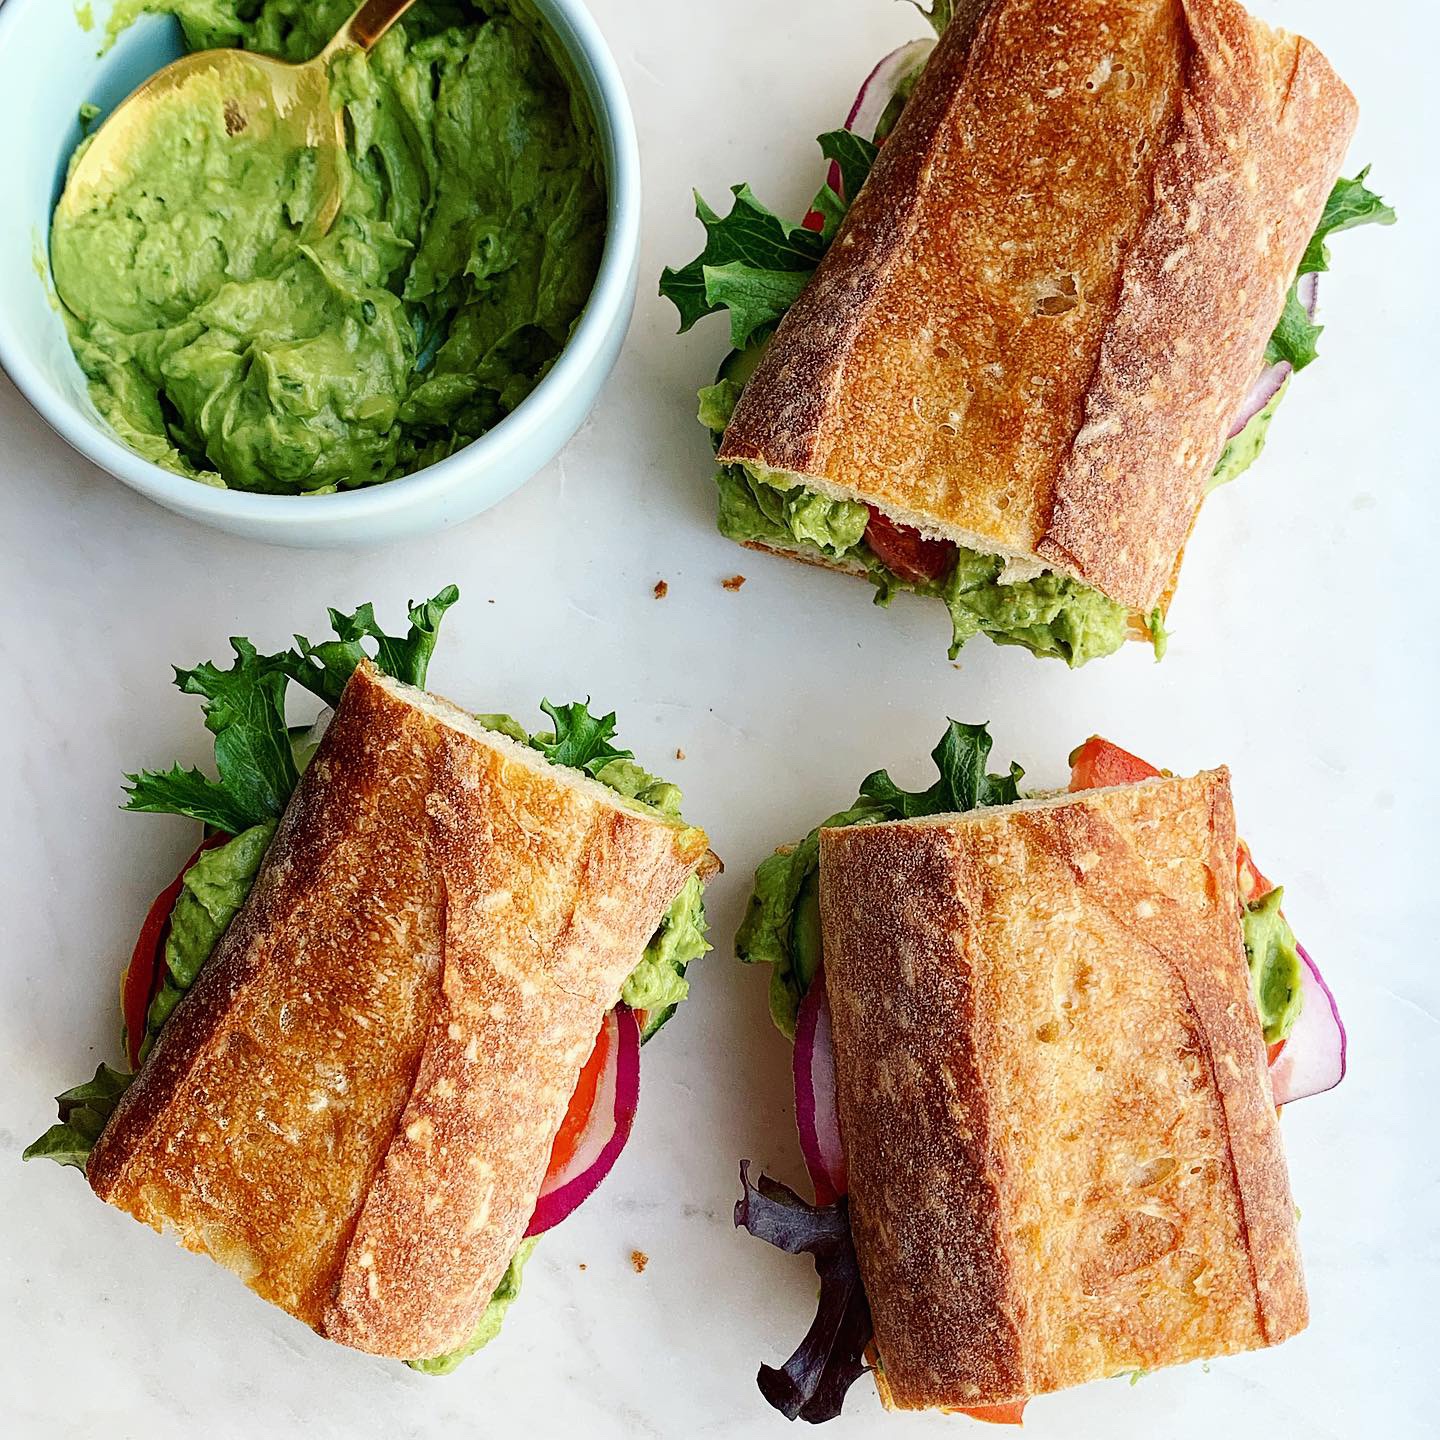 Picnic Sandwiches with Whipped Avocado